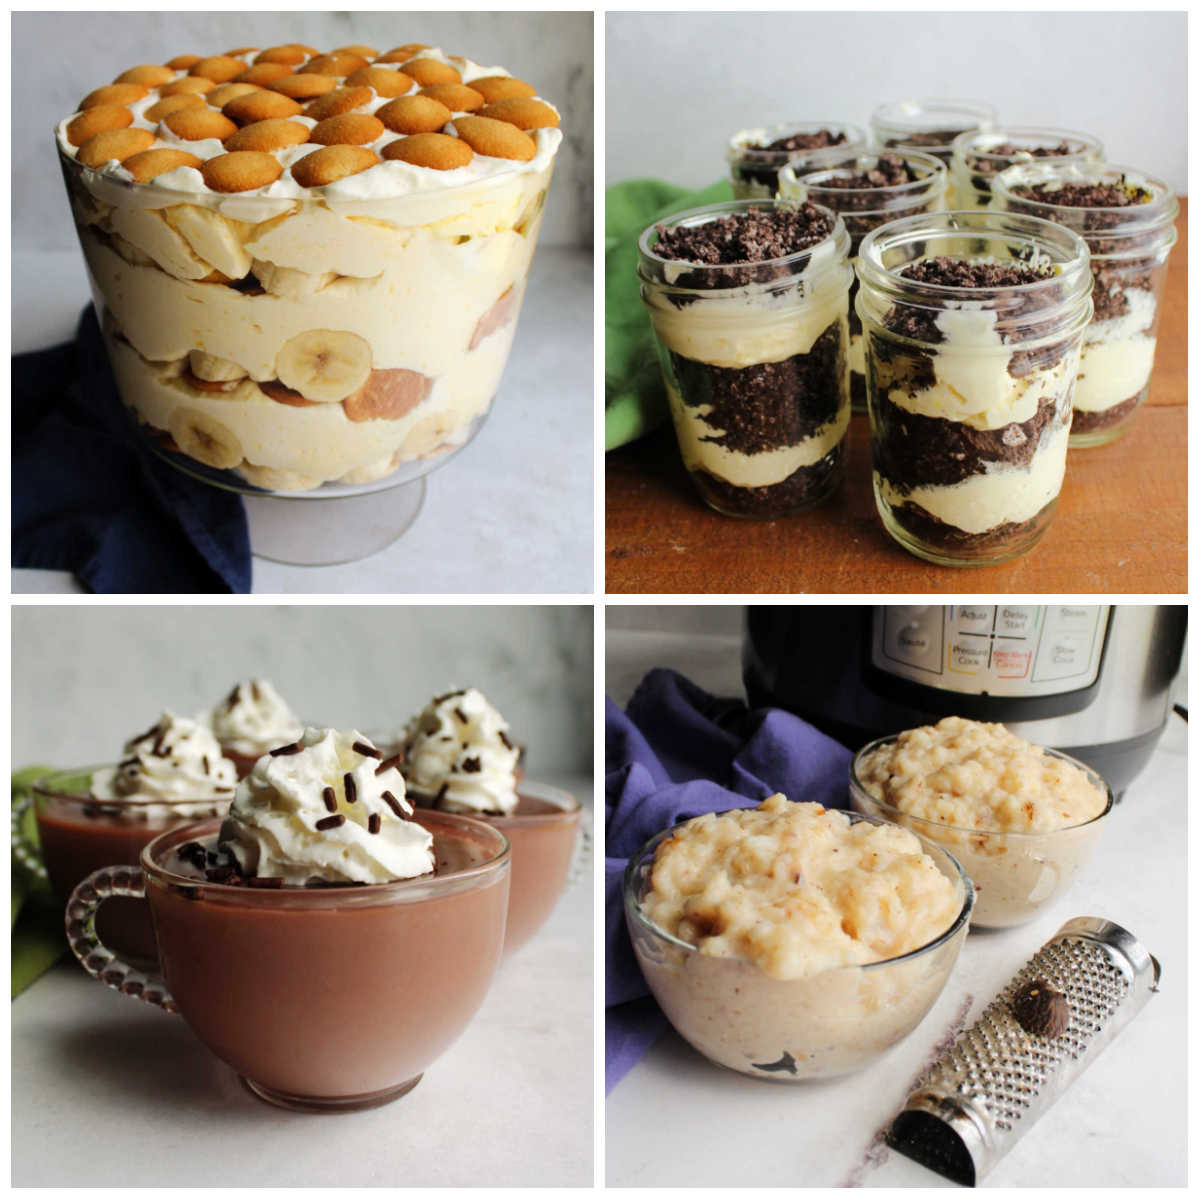 Collage of images of different pudding recipes including banana pudding, hot chocolate pudding, rice pudding, and dirt pudding.